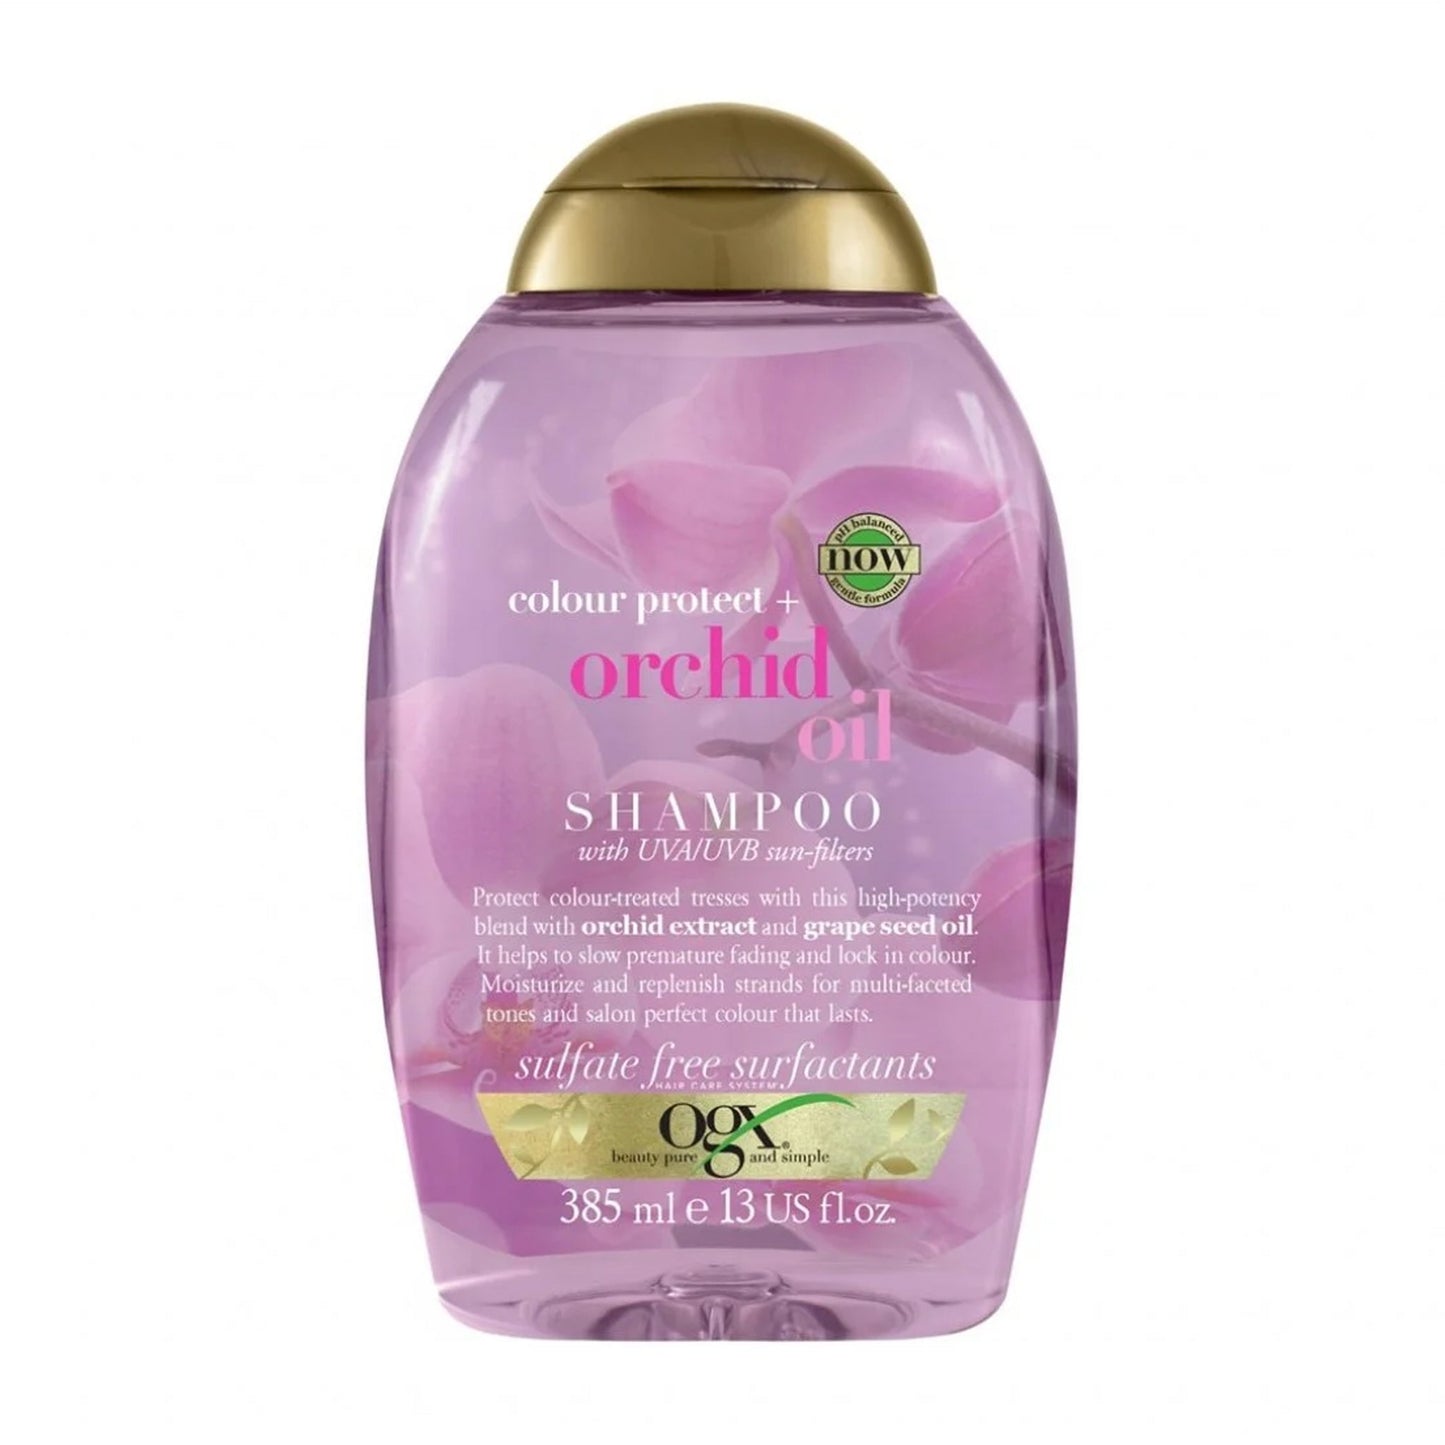 OGX - COLOUR PROTECT+ ORCHID OIL SHAMPOO - 385ML